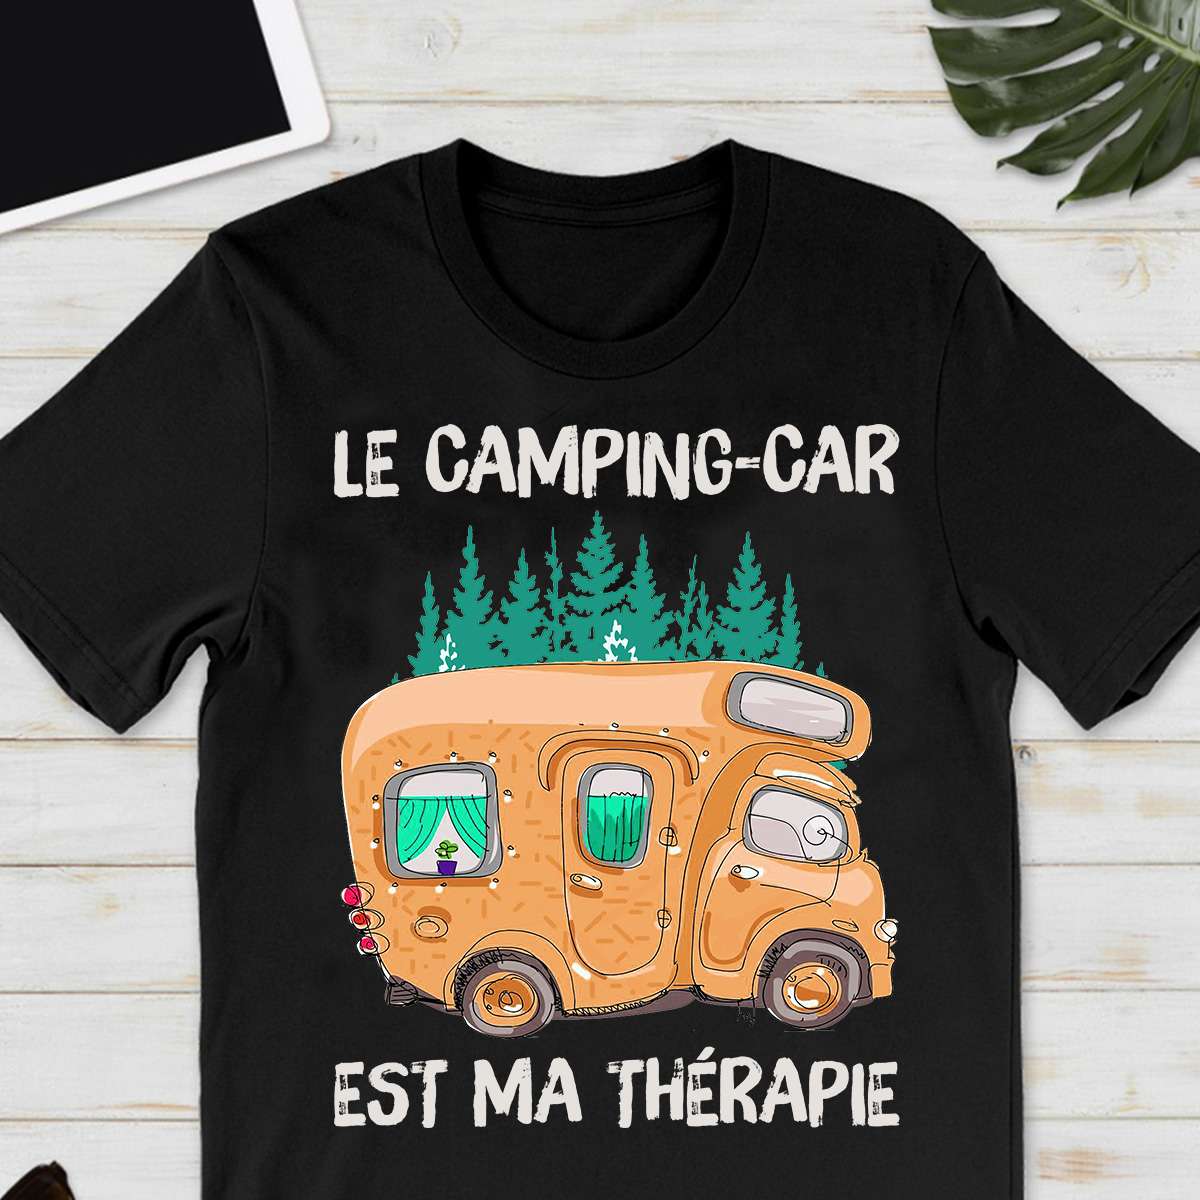 Le camping-car est ma therapie - Camping the therapy, love camping outdoor